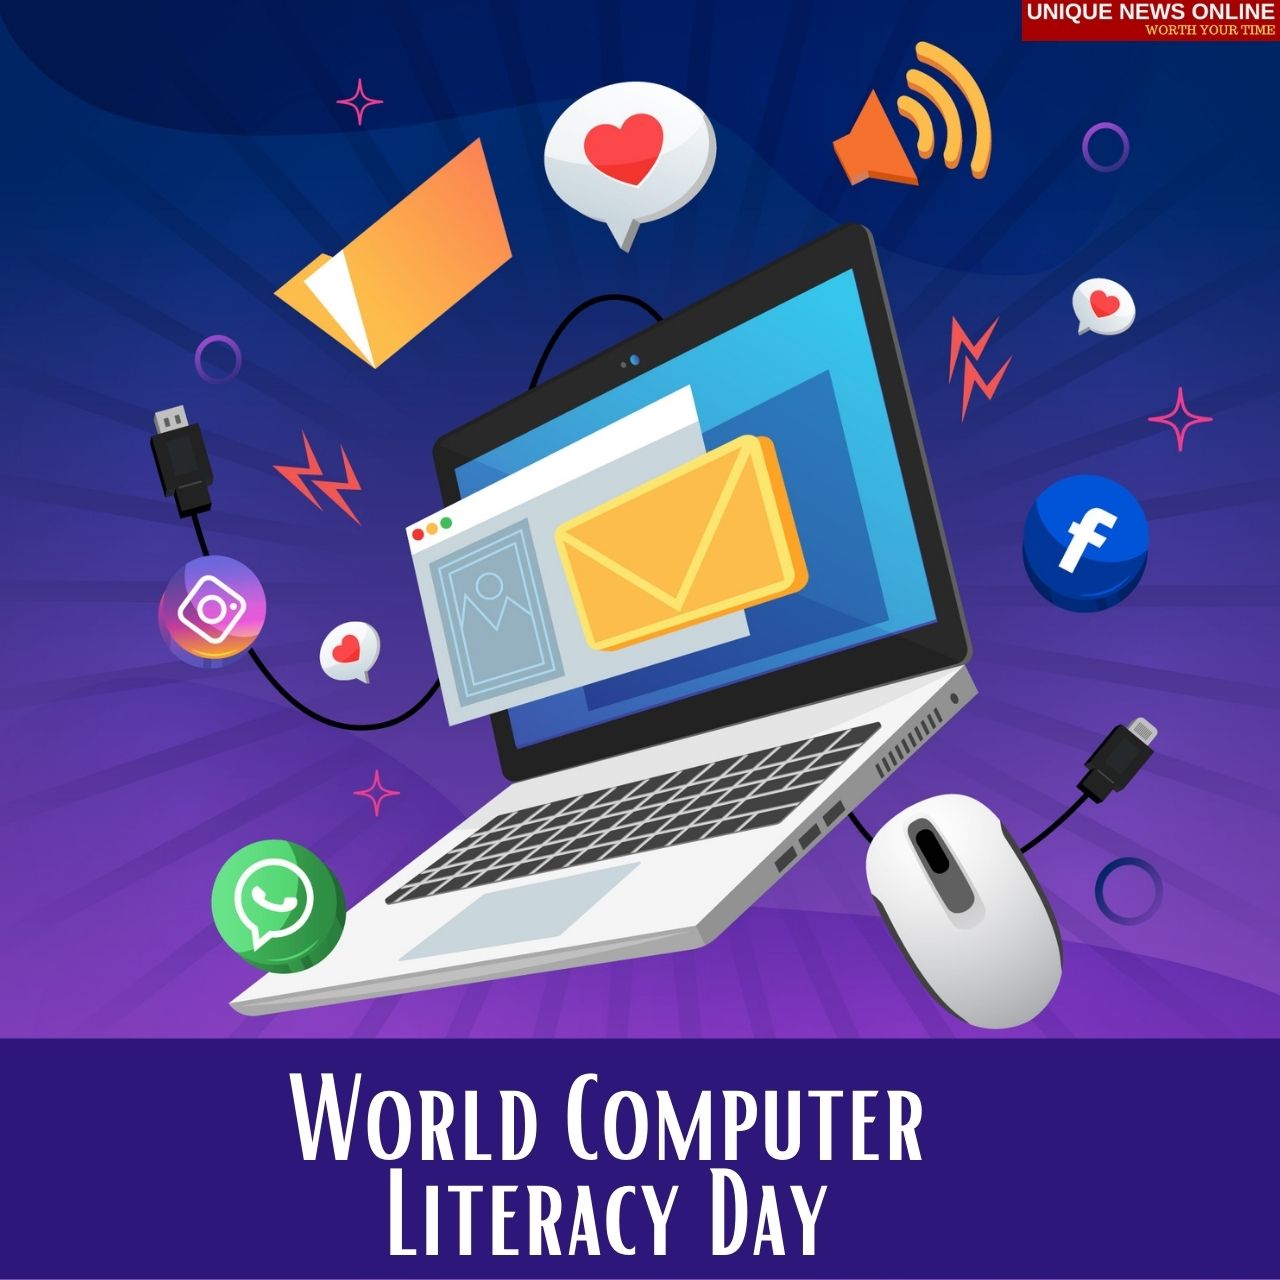 World Computer Literacy Day 2021 Quotes, HD Images, Message, Slogans, and Posters to create awareness